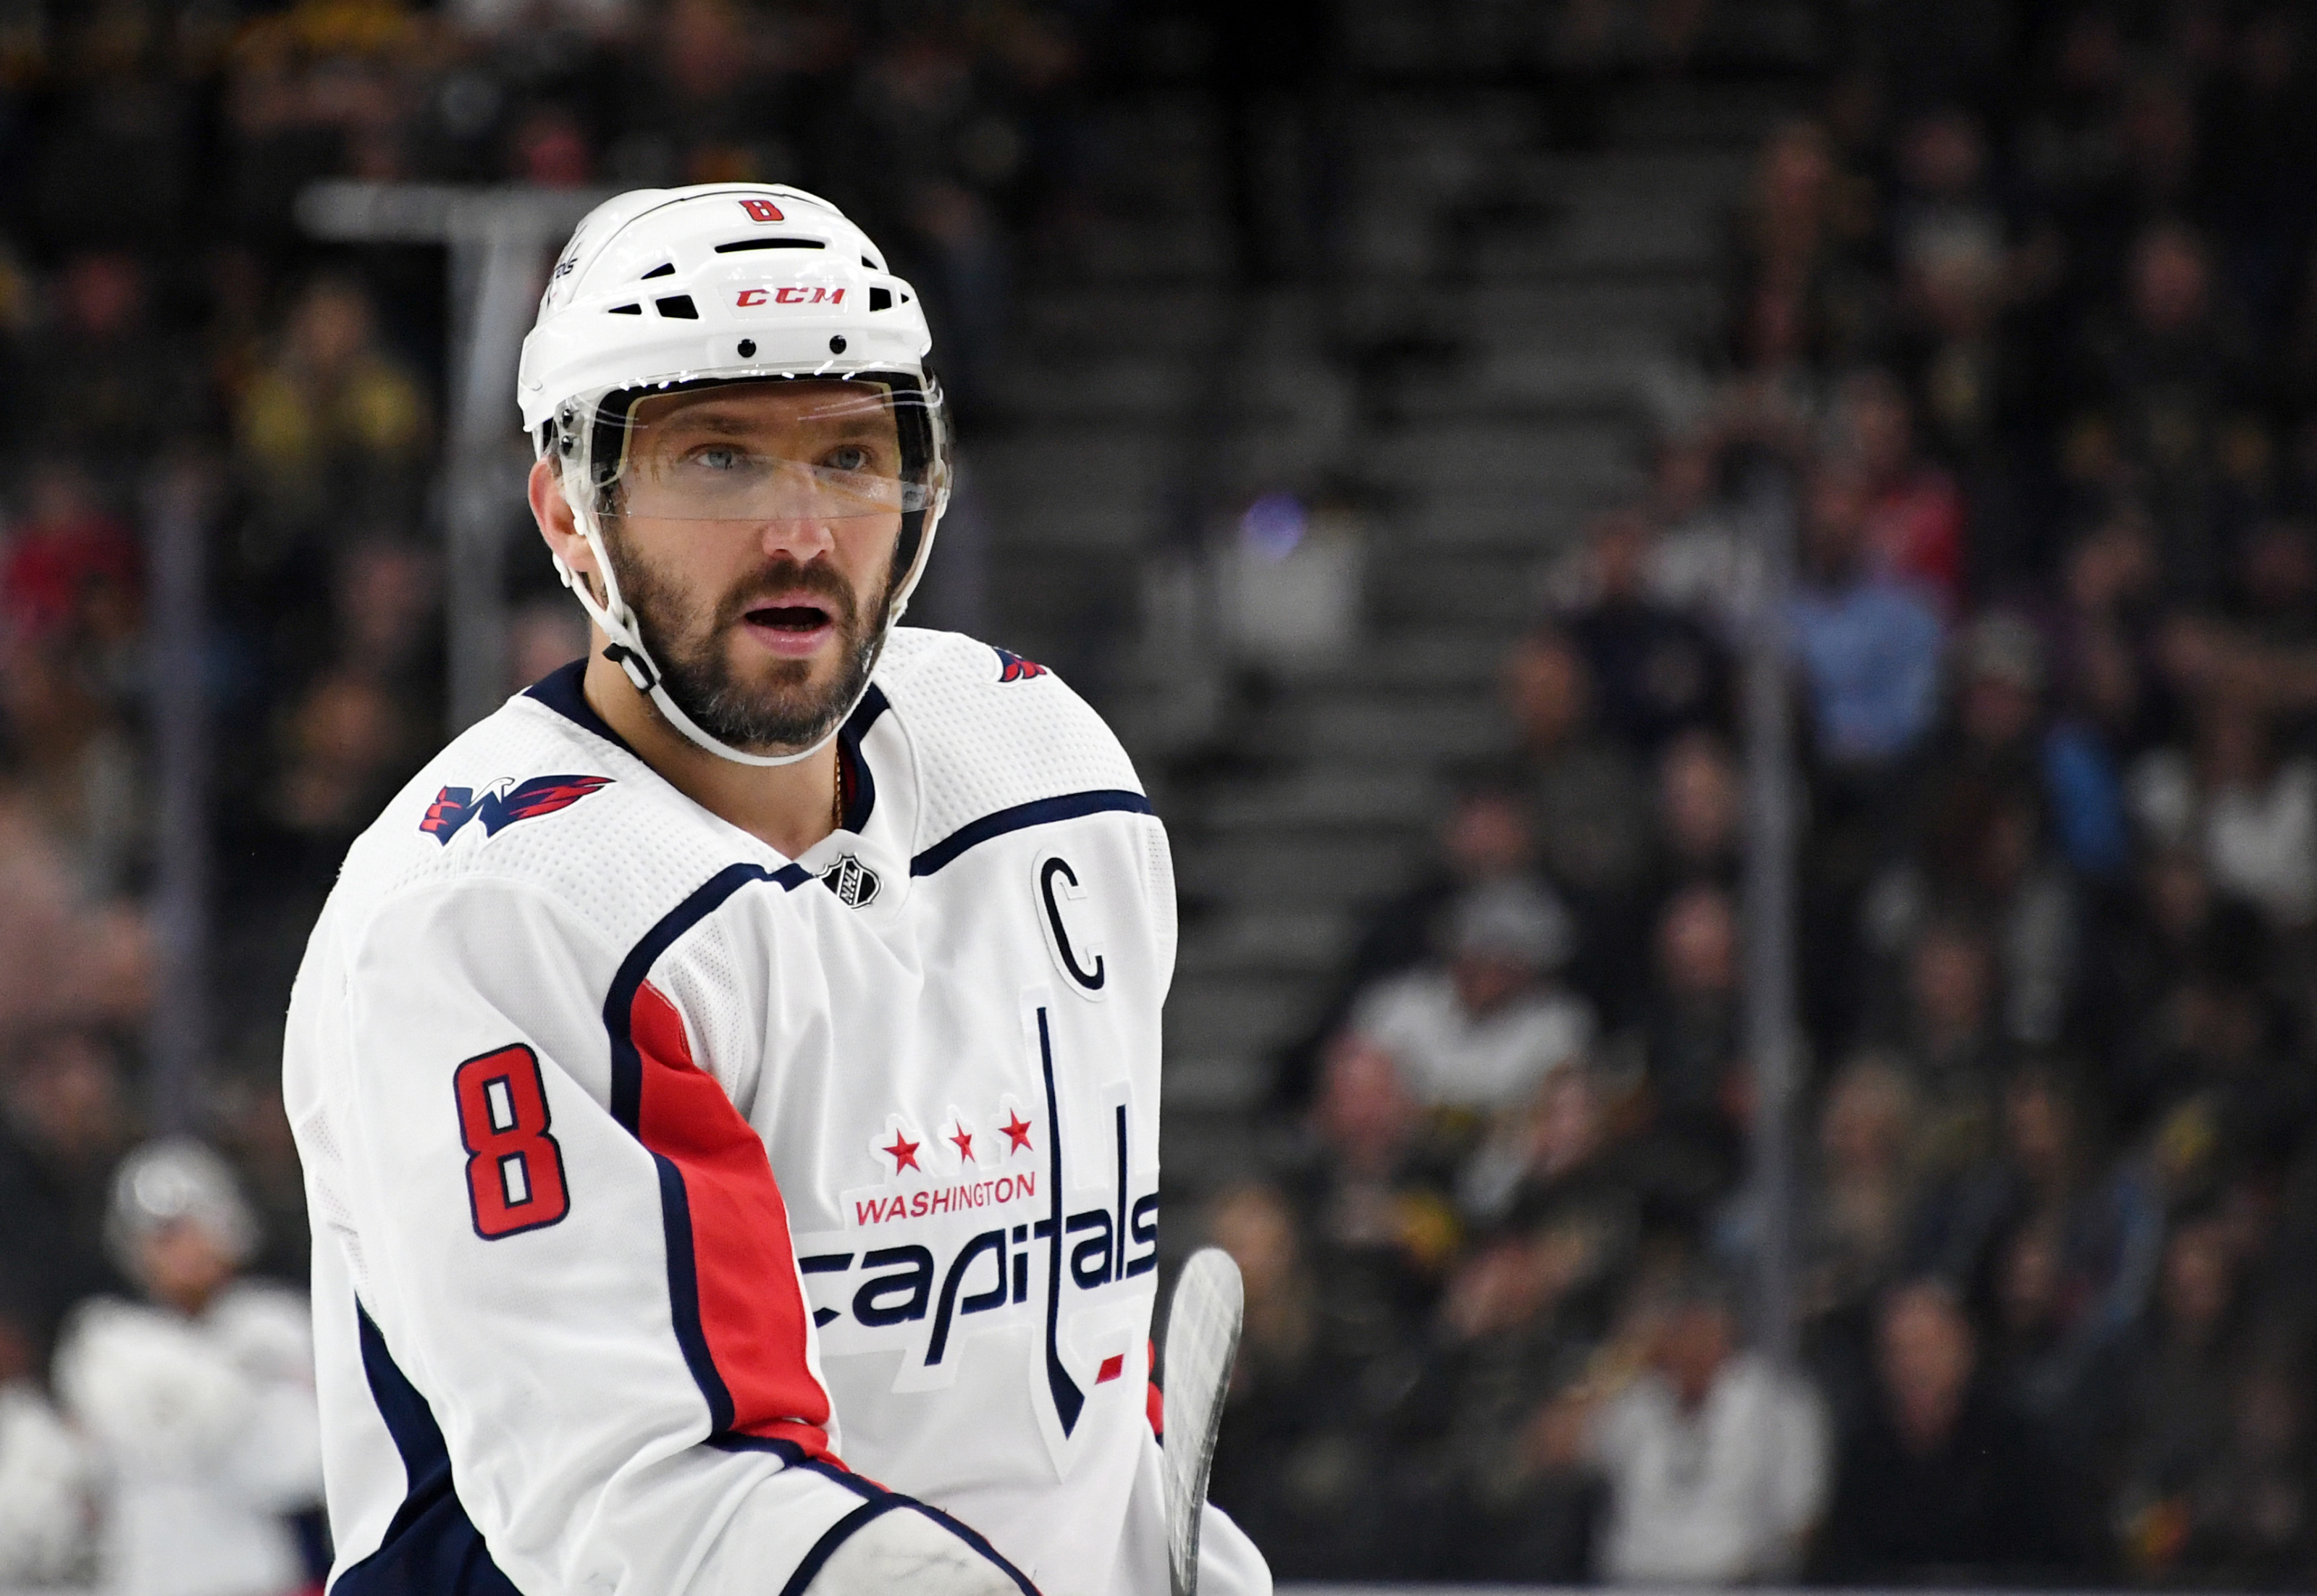 NHL Rewind: Alex Ovechkin makes more history, Bruins get torched